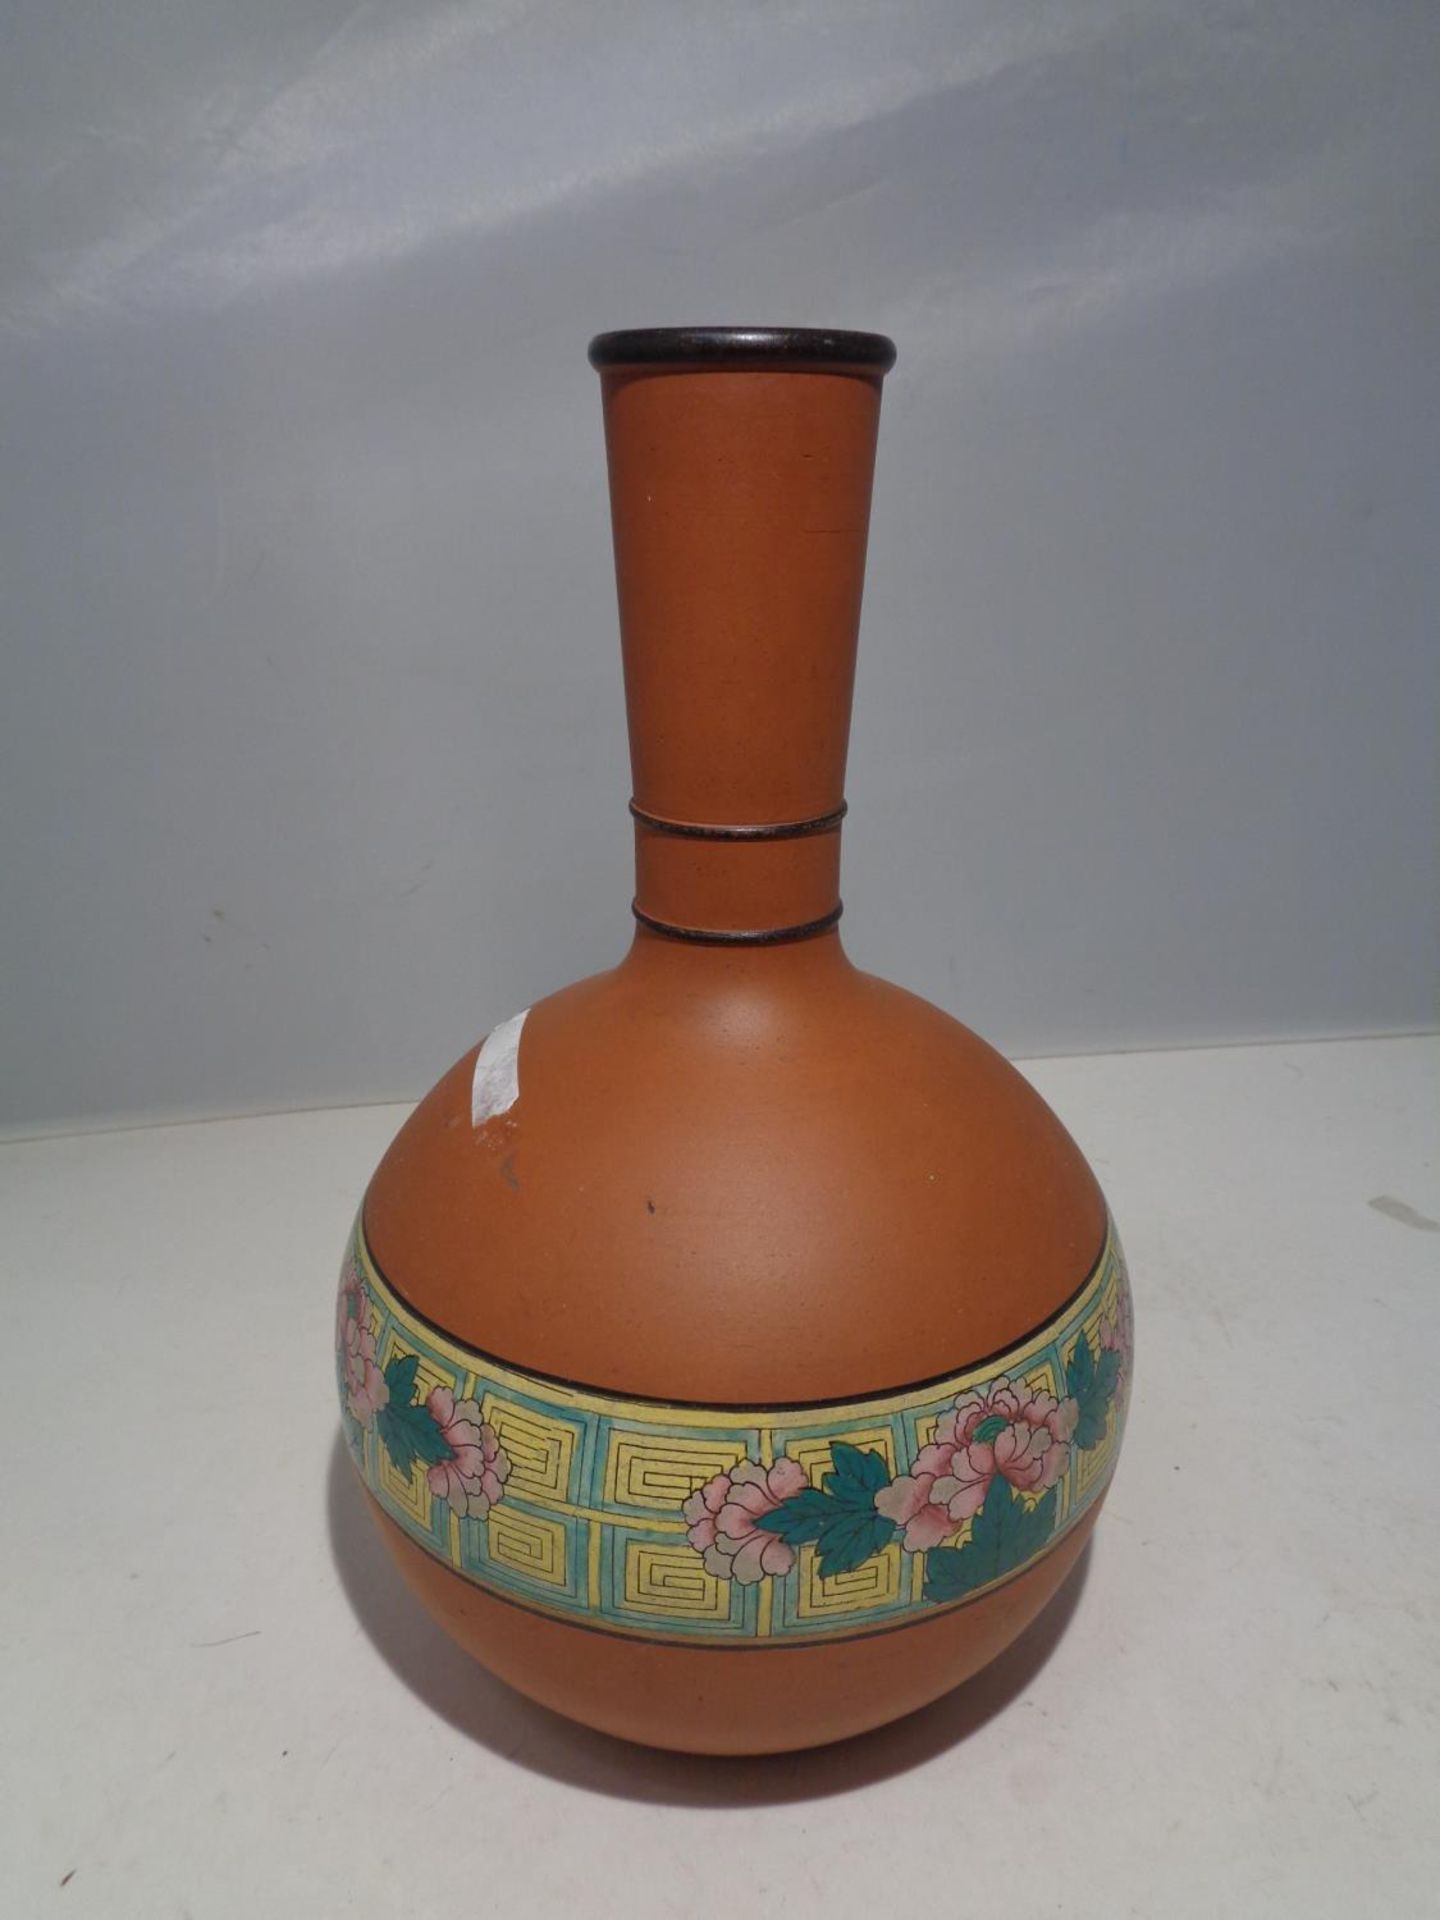 A DB &CO ETRURIA TERRACOTTA VASE WITH A FLOWER DESIGN - Image 2 of 4